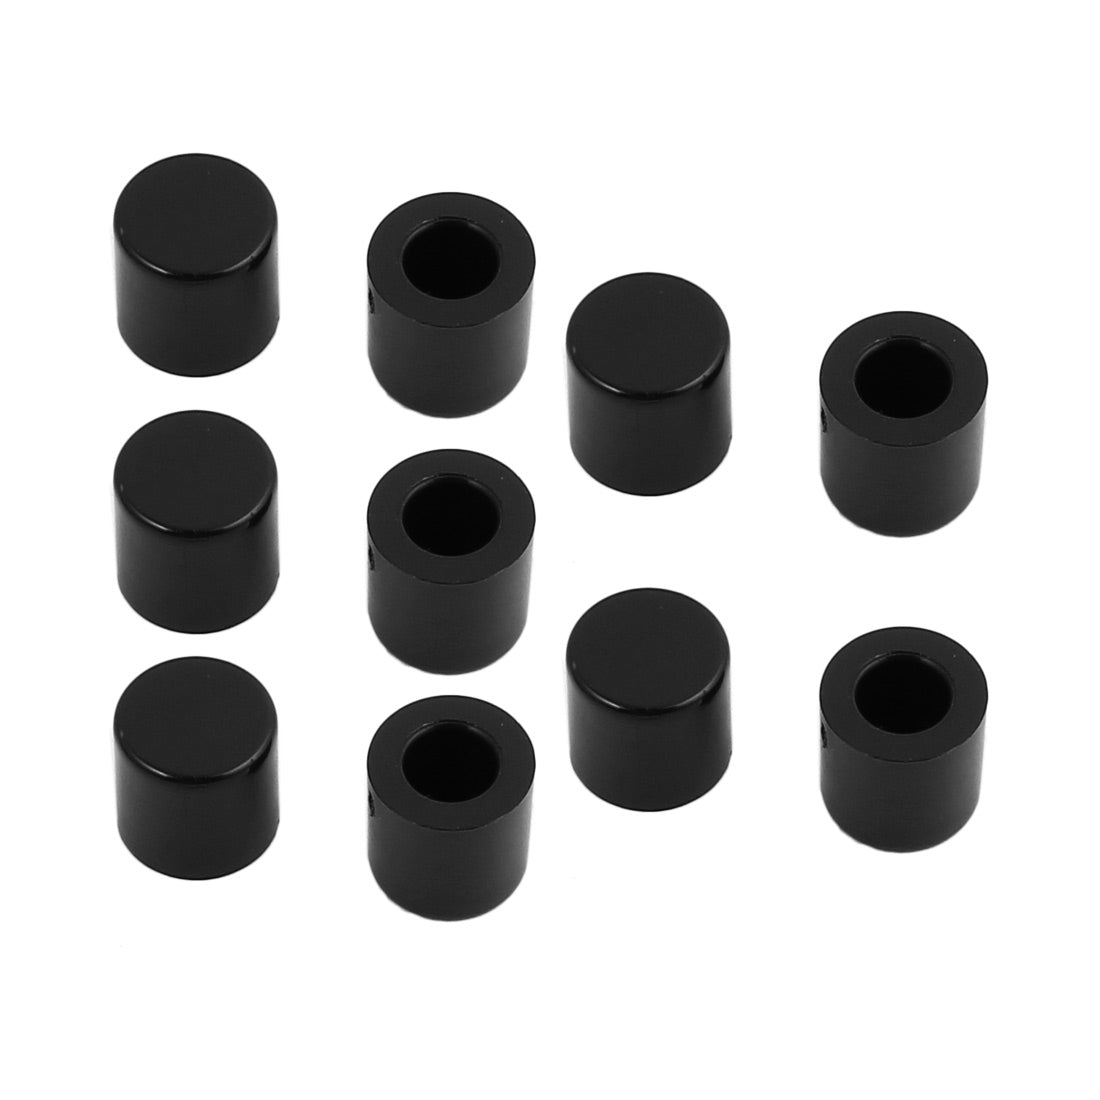 uxcell Uxcell 10Pcs Round Shaped Tactile Button Caps Covers Protector Black for 6x6mm Tact Switch